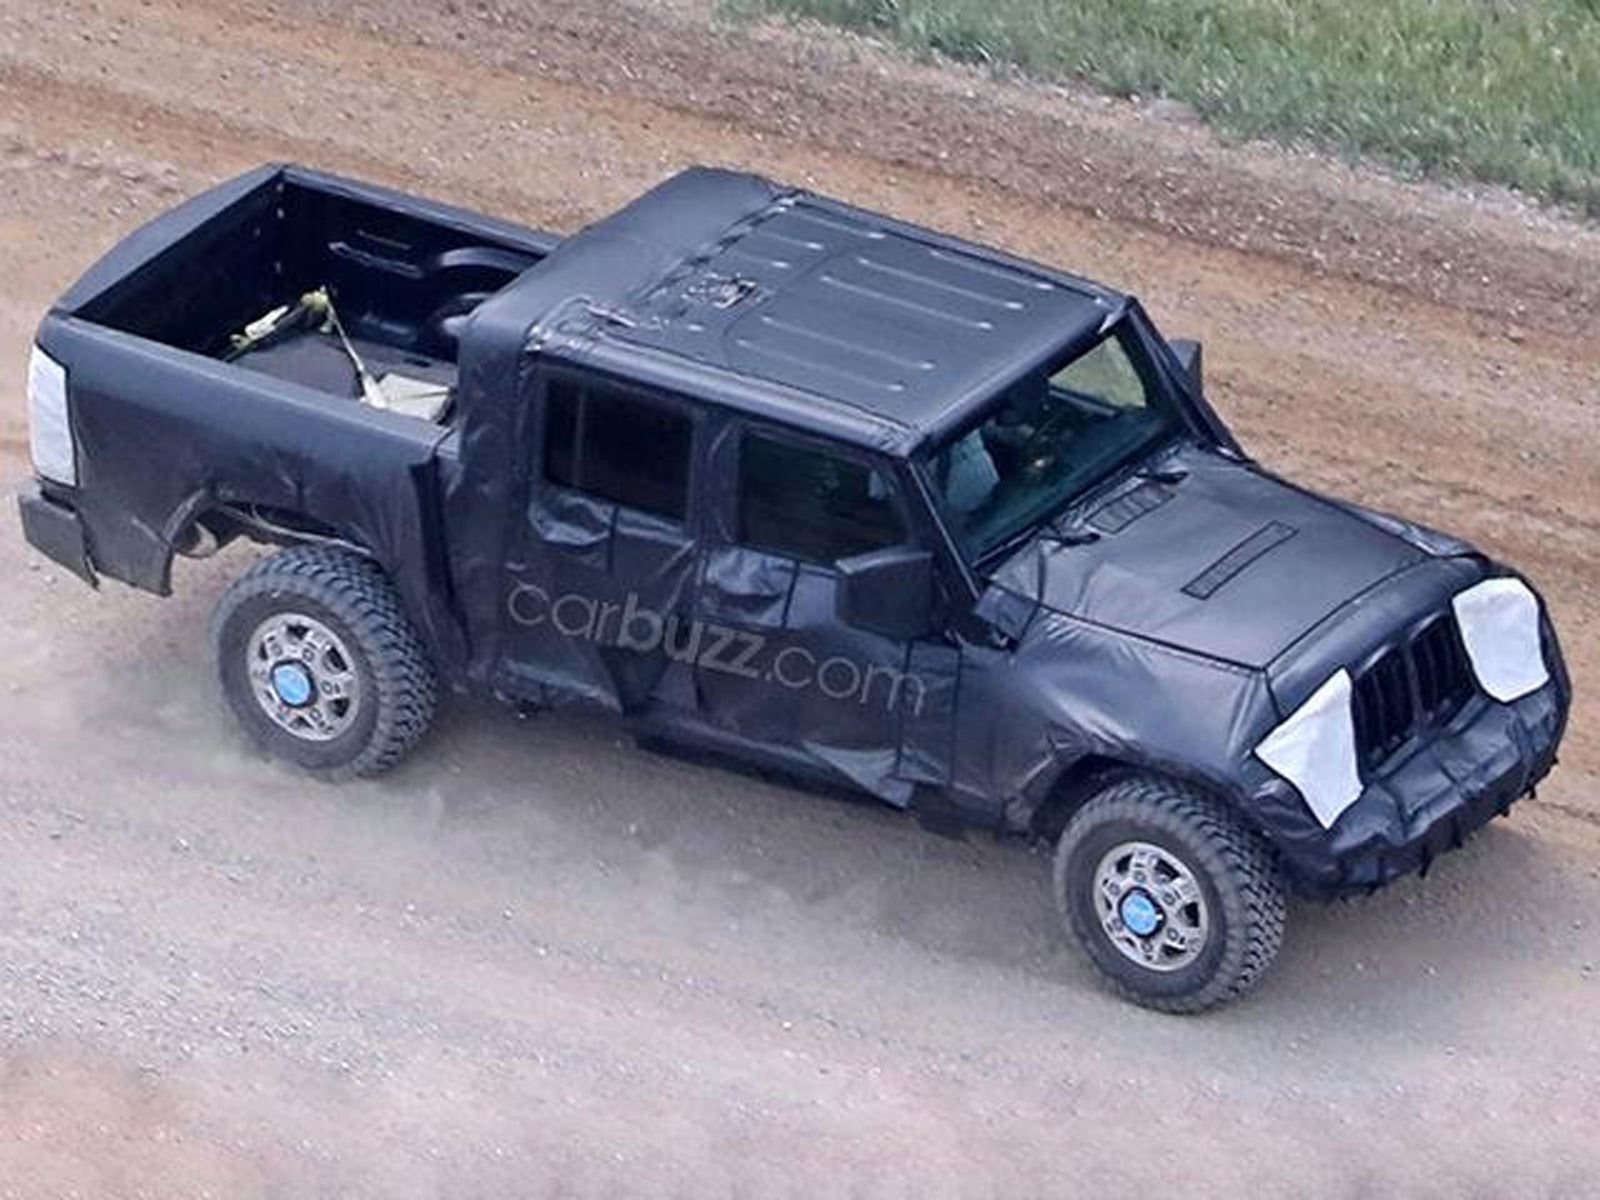 Here's When The Jeep Wrangler Pickup Truck Will Be In Dealerships | CarBuzz